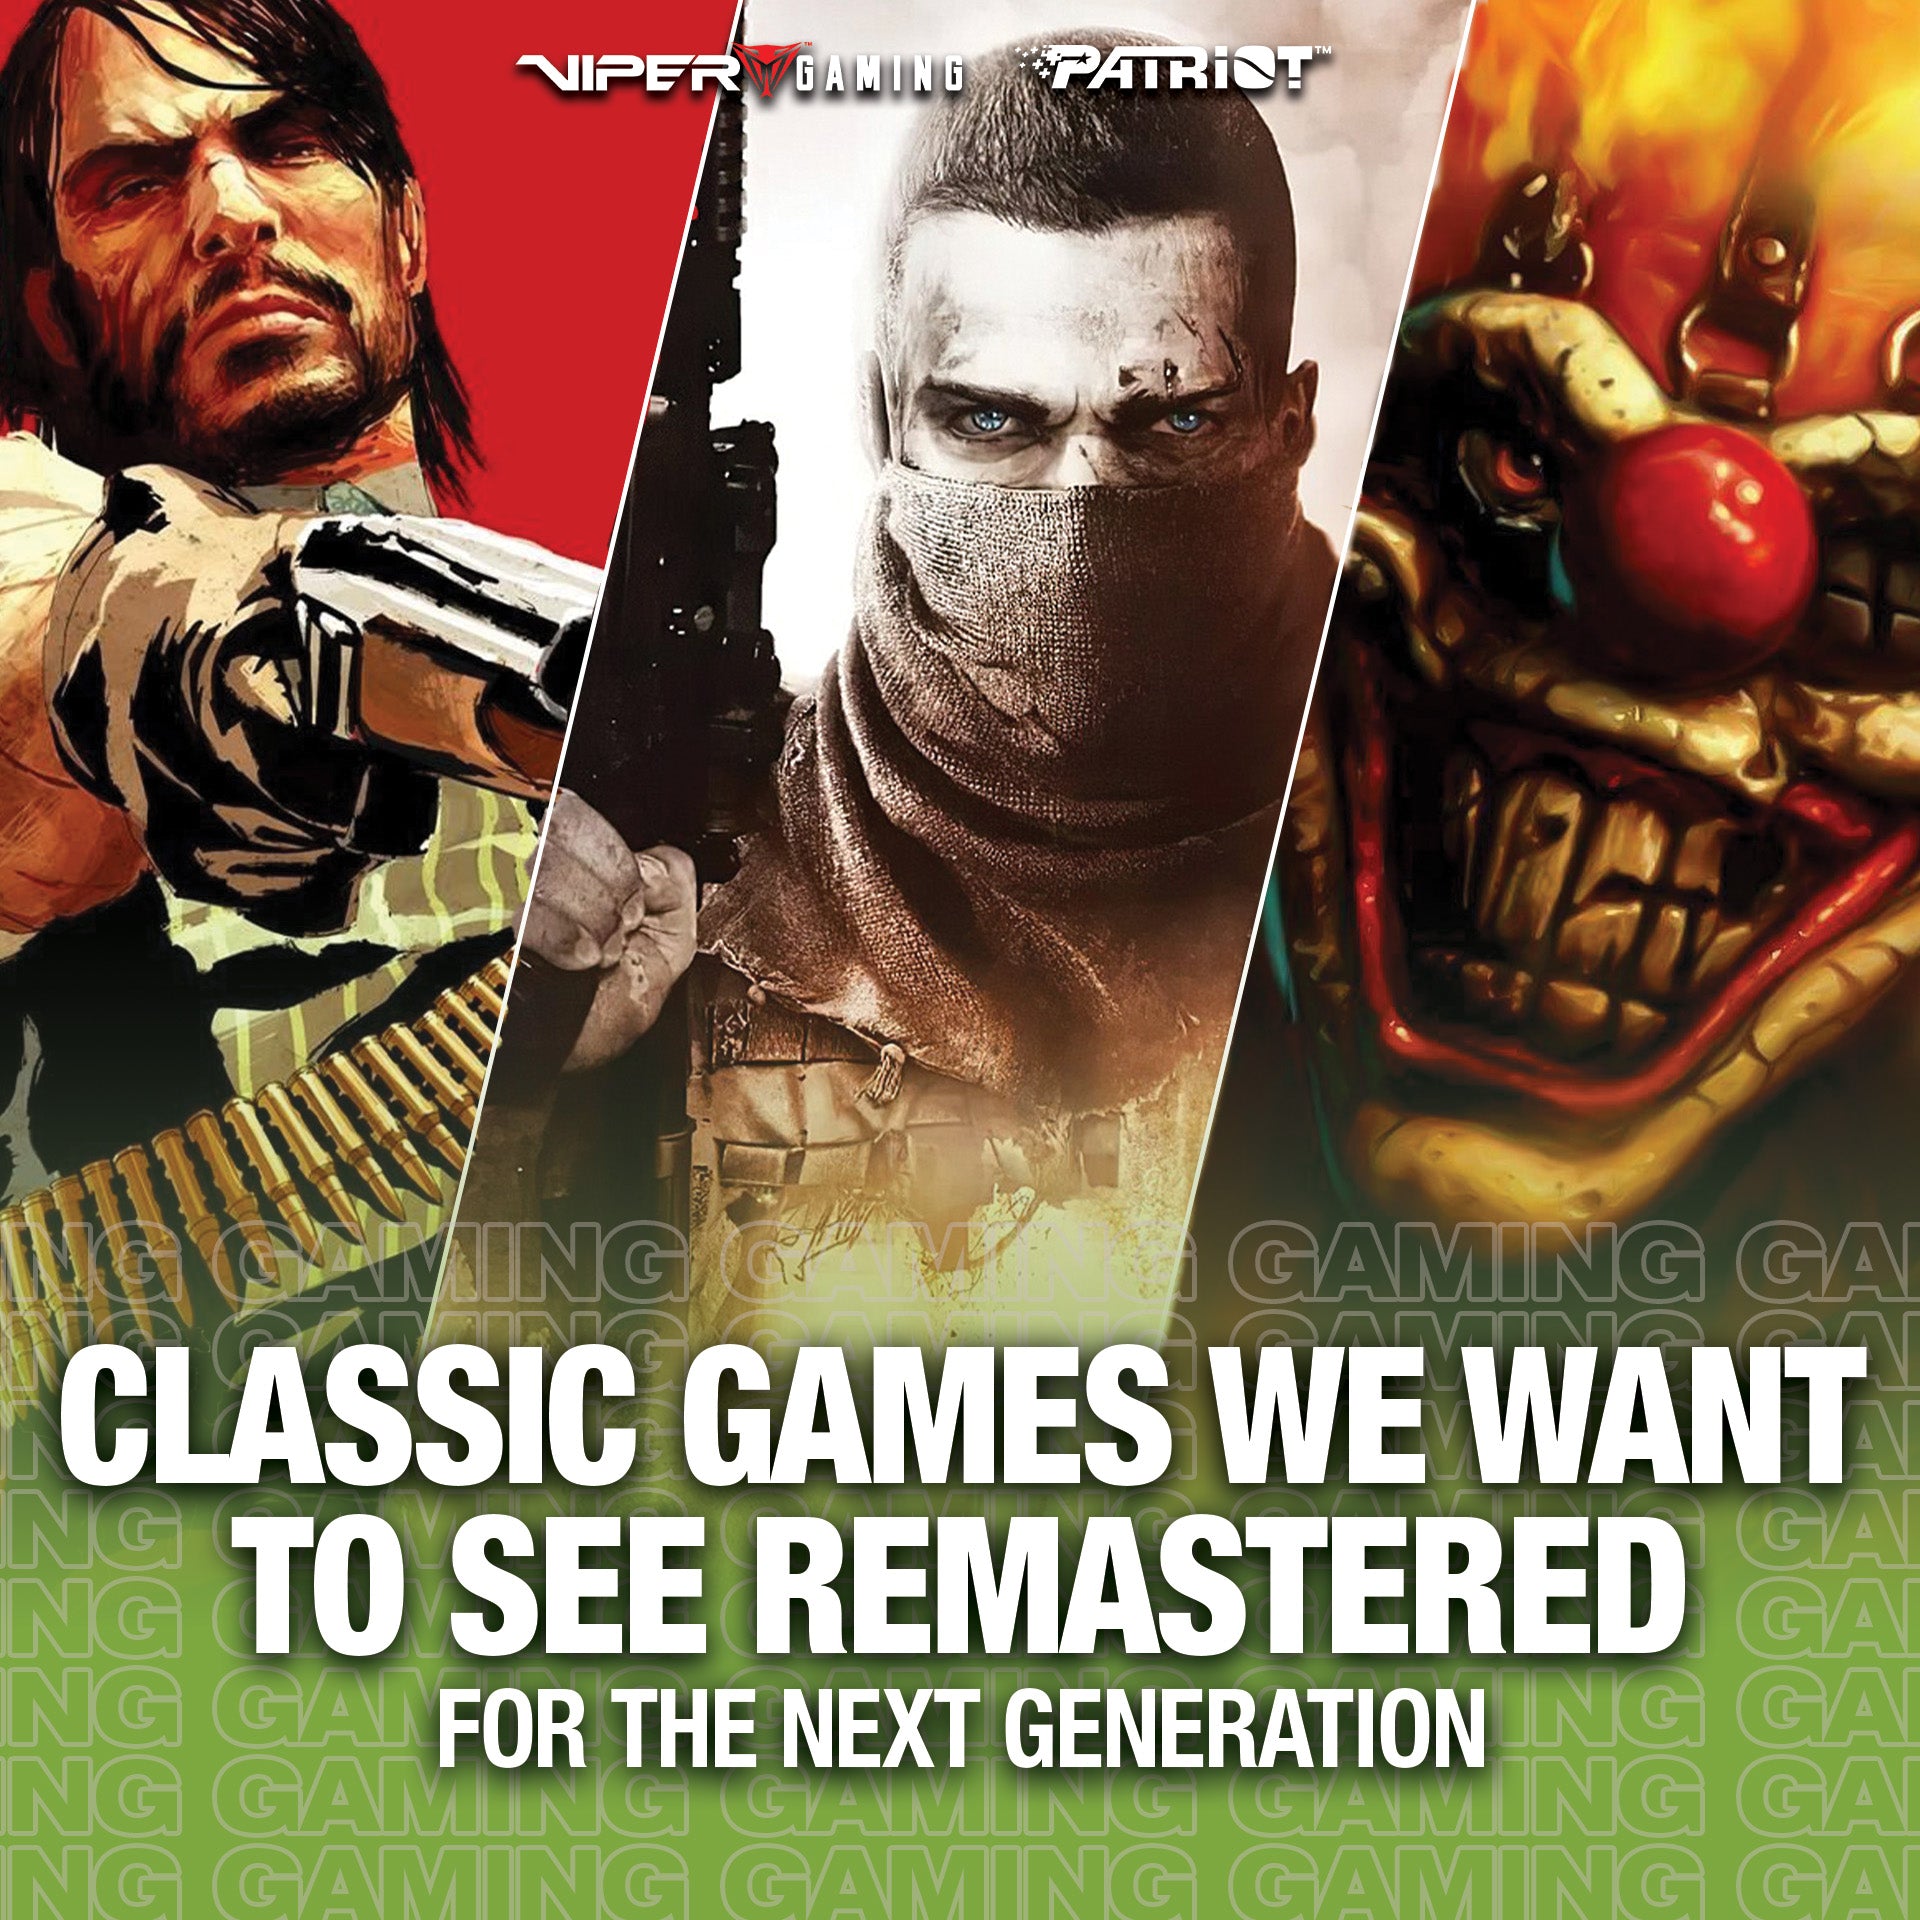 10 Classic Games We Want to See Remastered